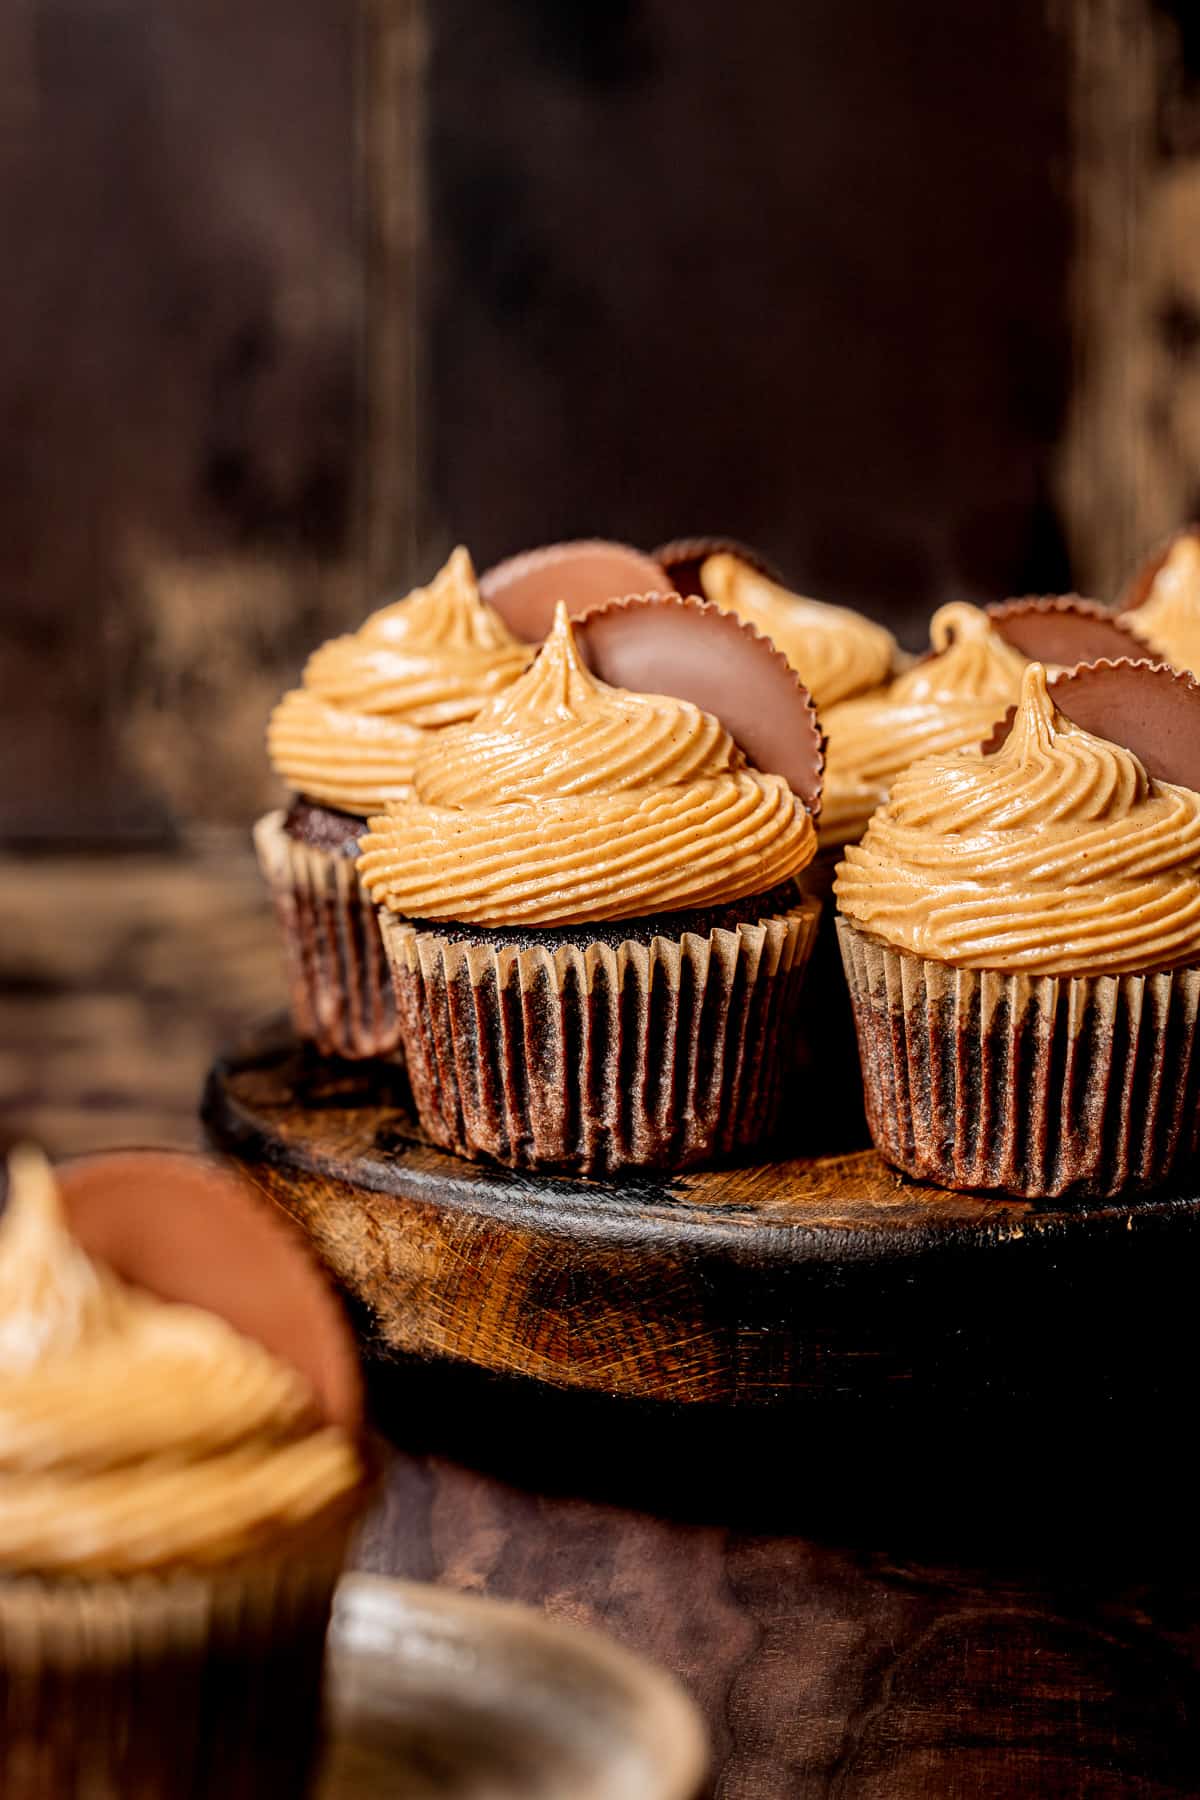 chocolate peanut butter cup cupcakes on cake stand.